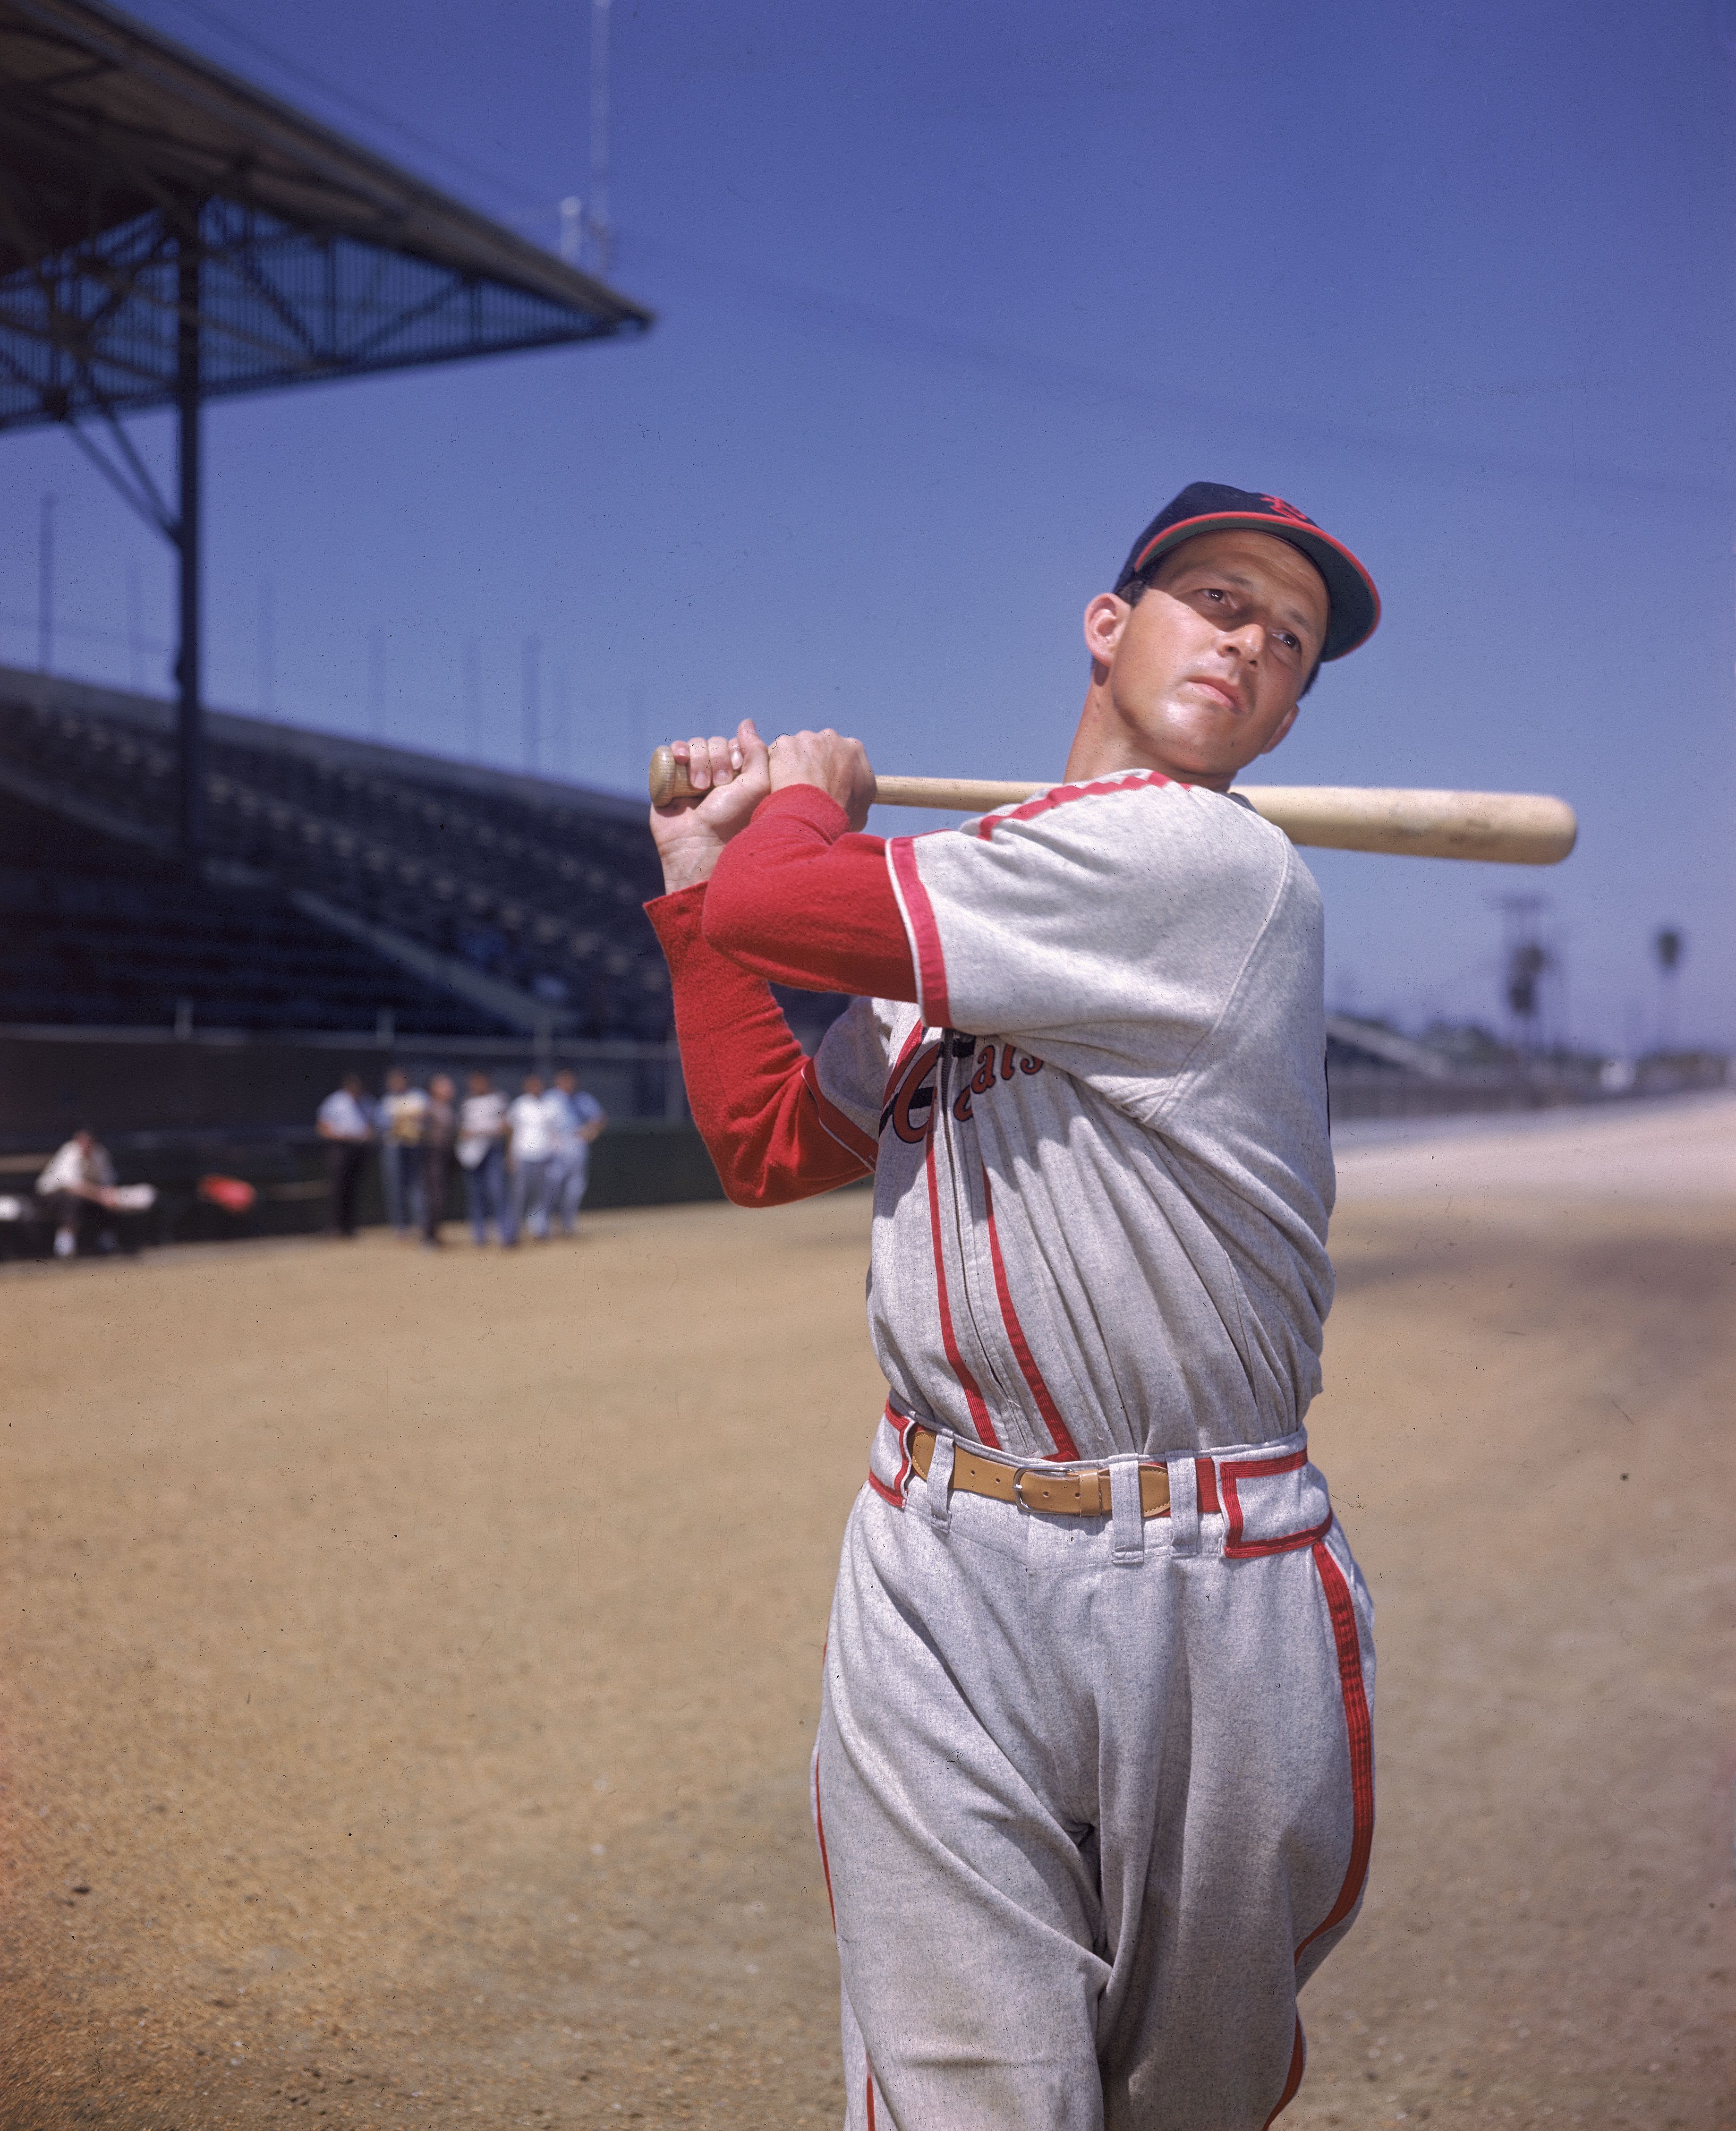 Greatest Cardinal Musial dies at 92